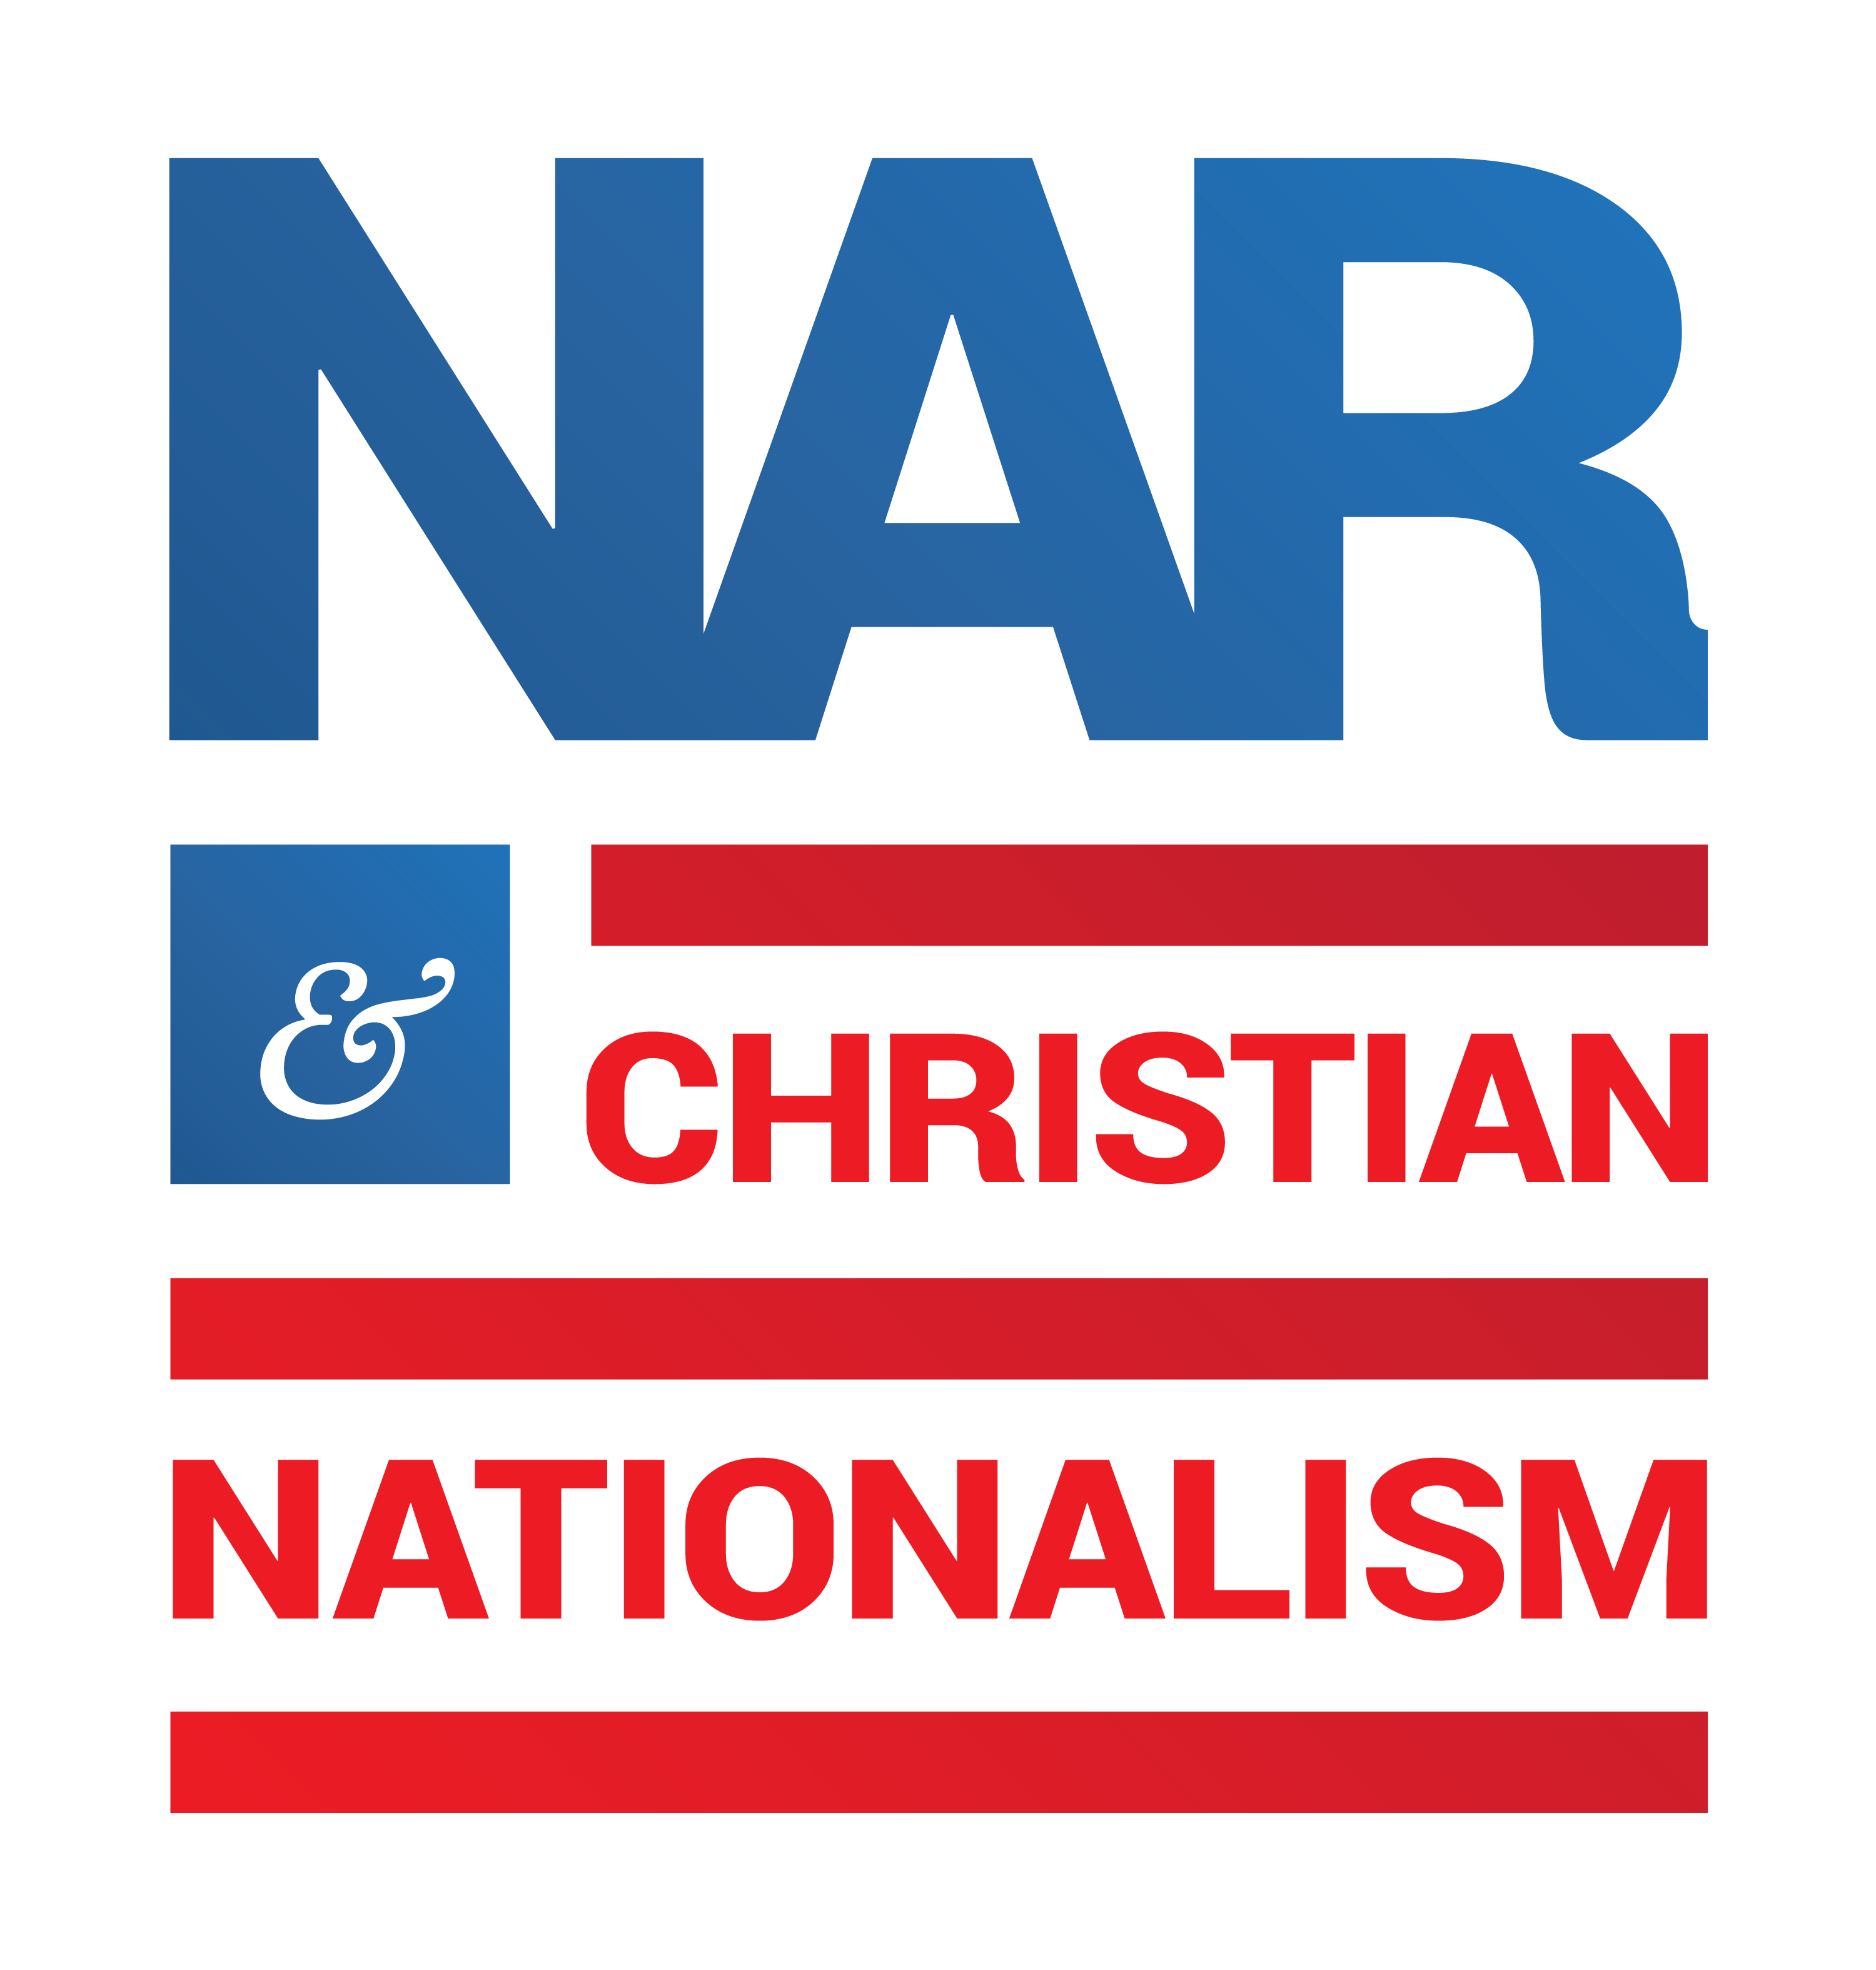 NAR & Christian Nationalism Statement – The controversy surrounding the  terms “New Apostolic Reformation” (NAR) & “Christian Nationalism”